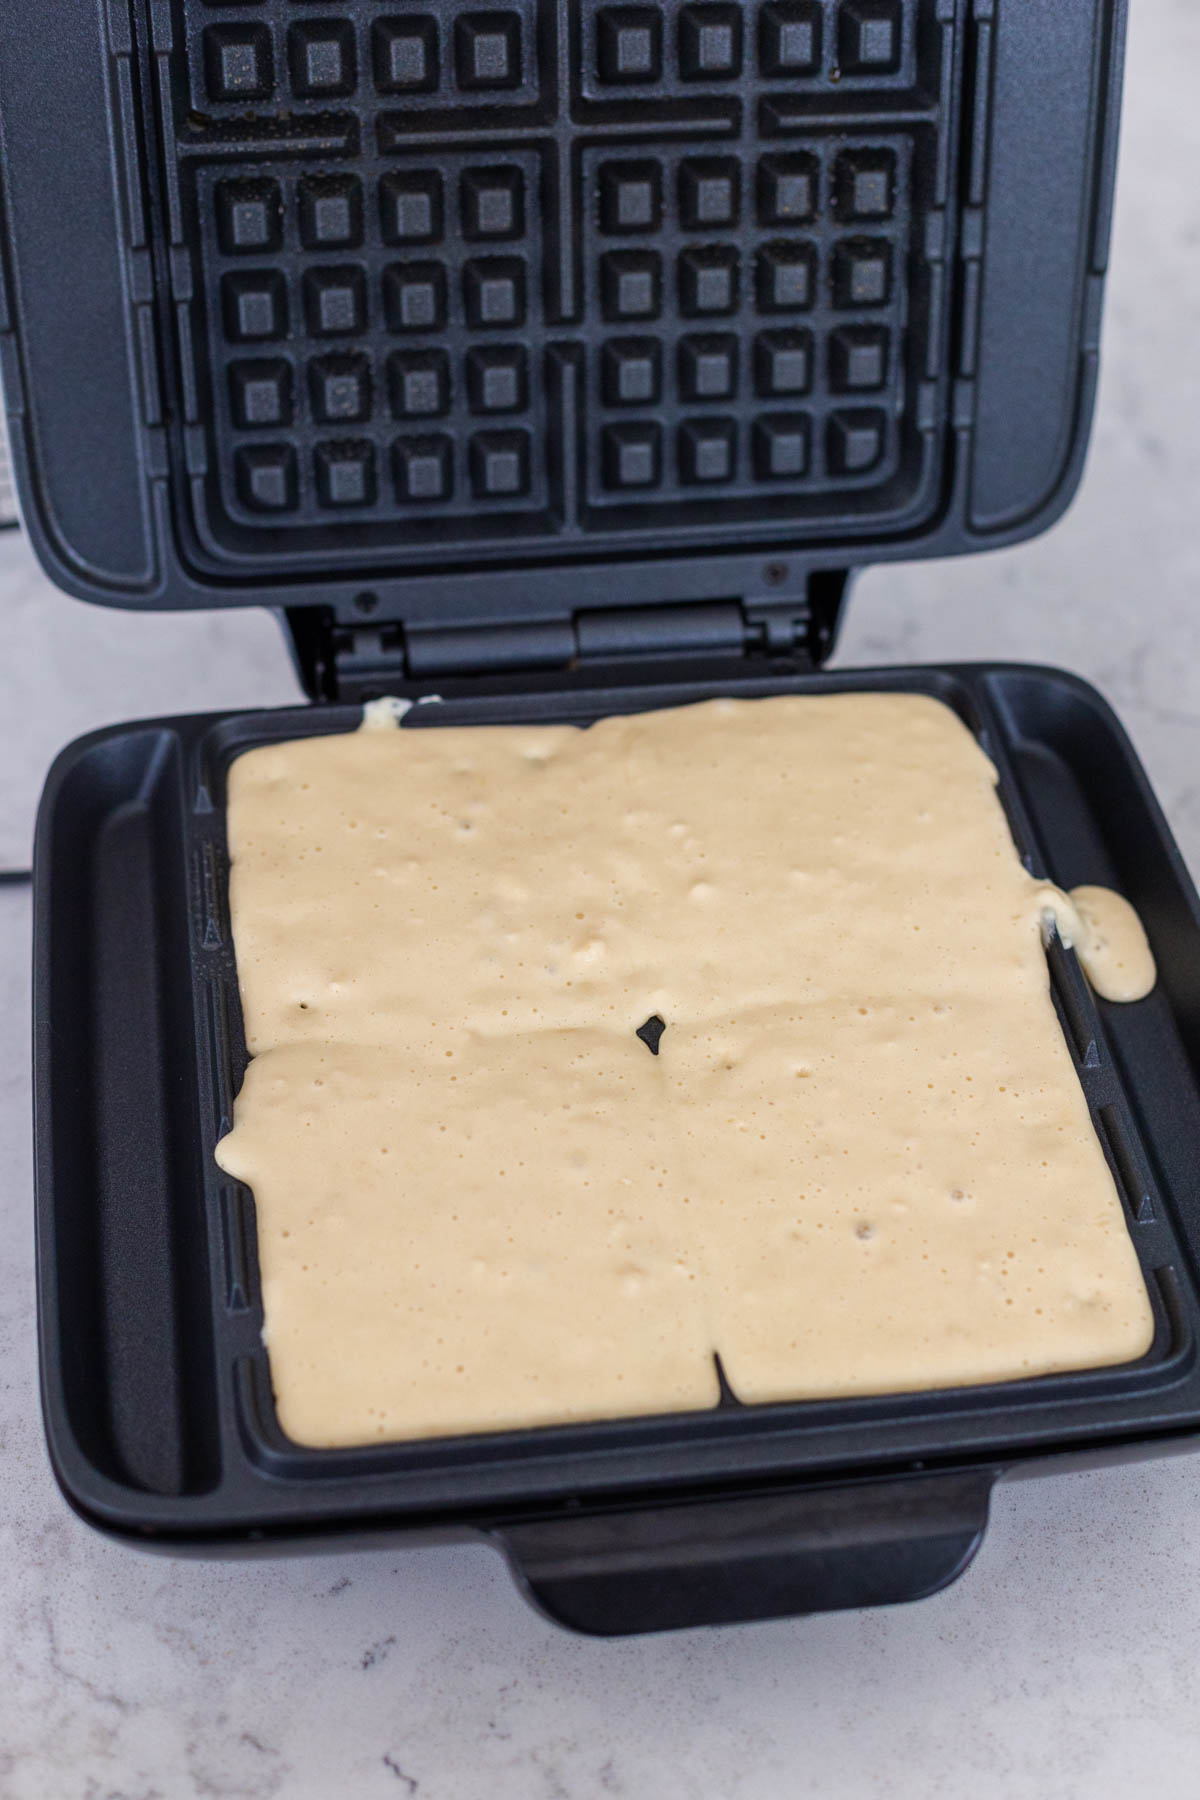 The waffles are added to the waffle maker.